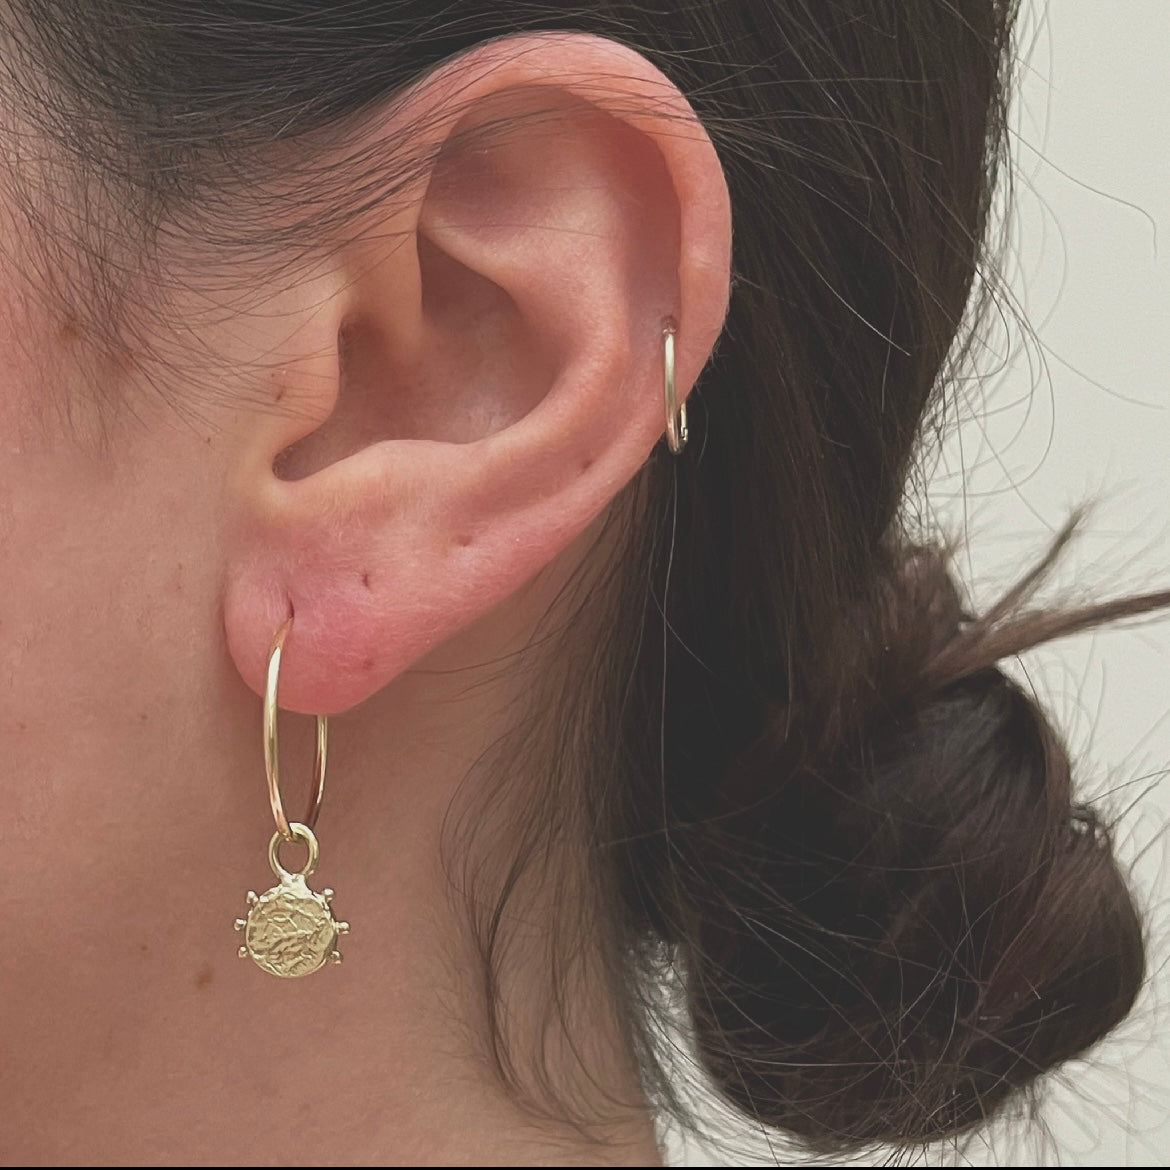 The Ancient Coin Earrings